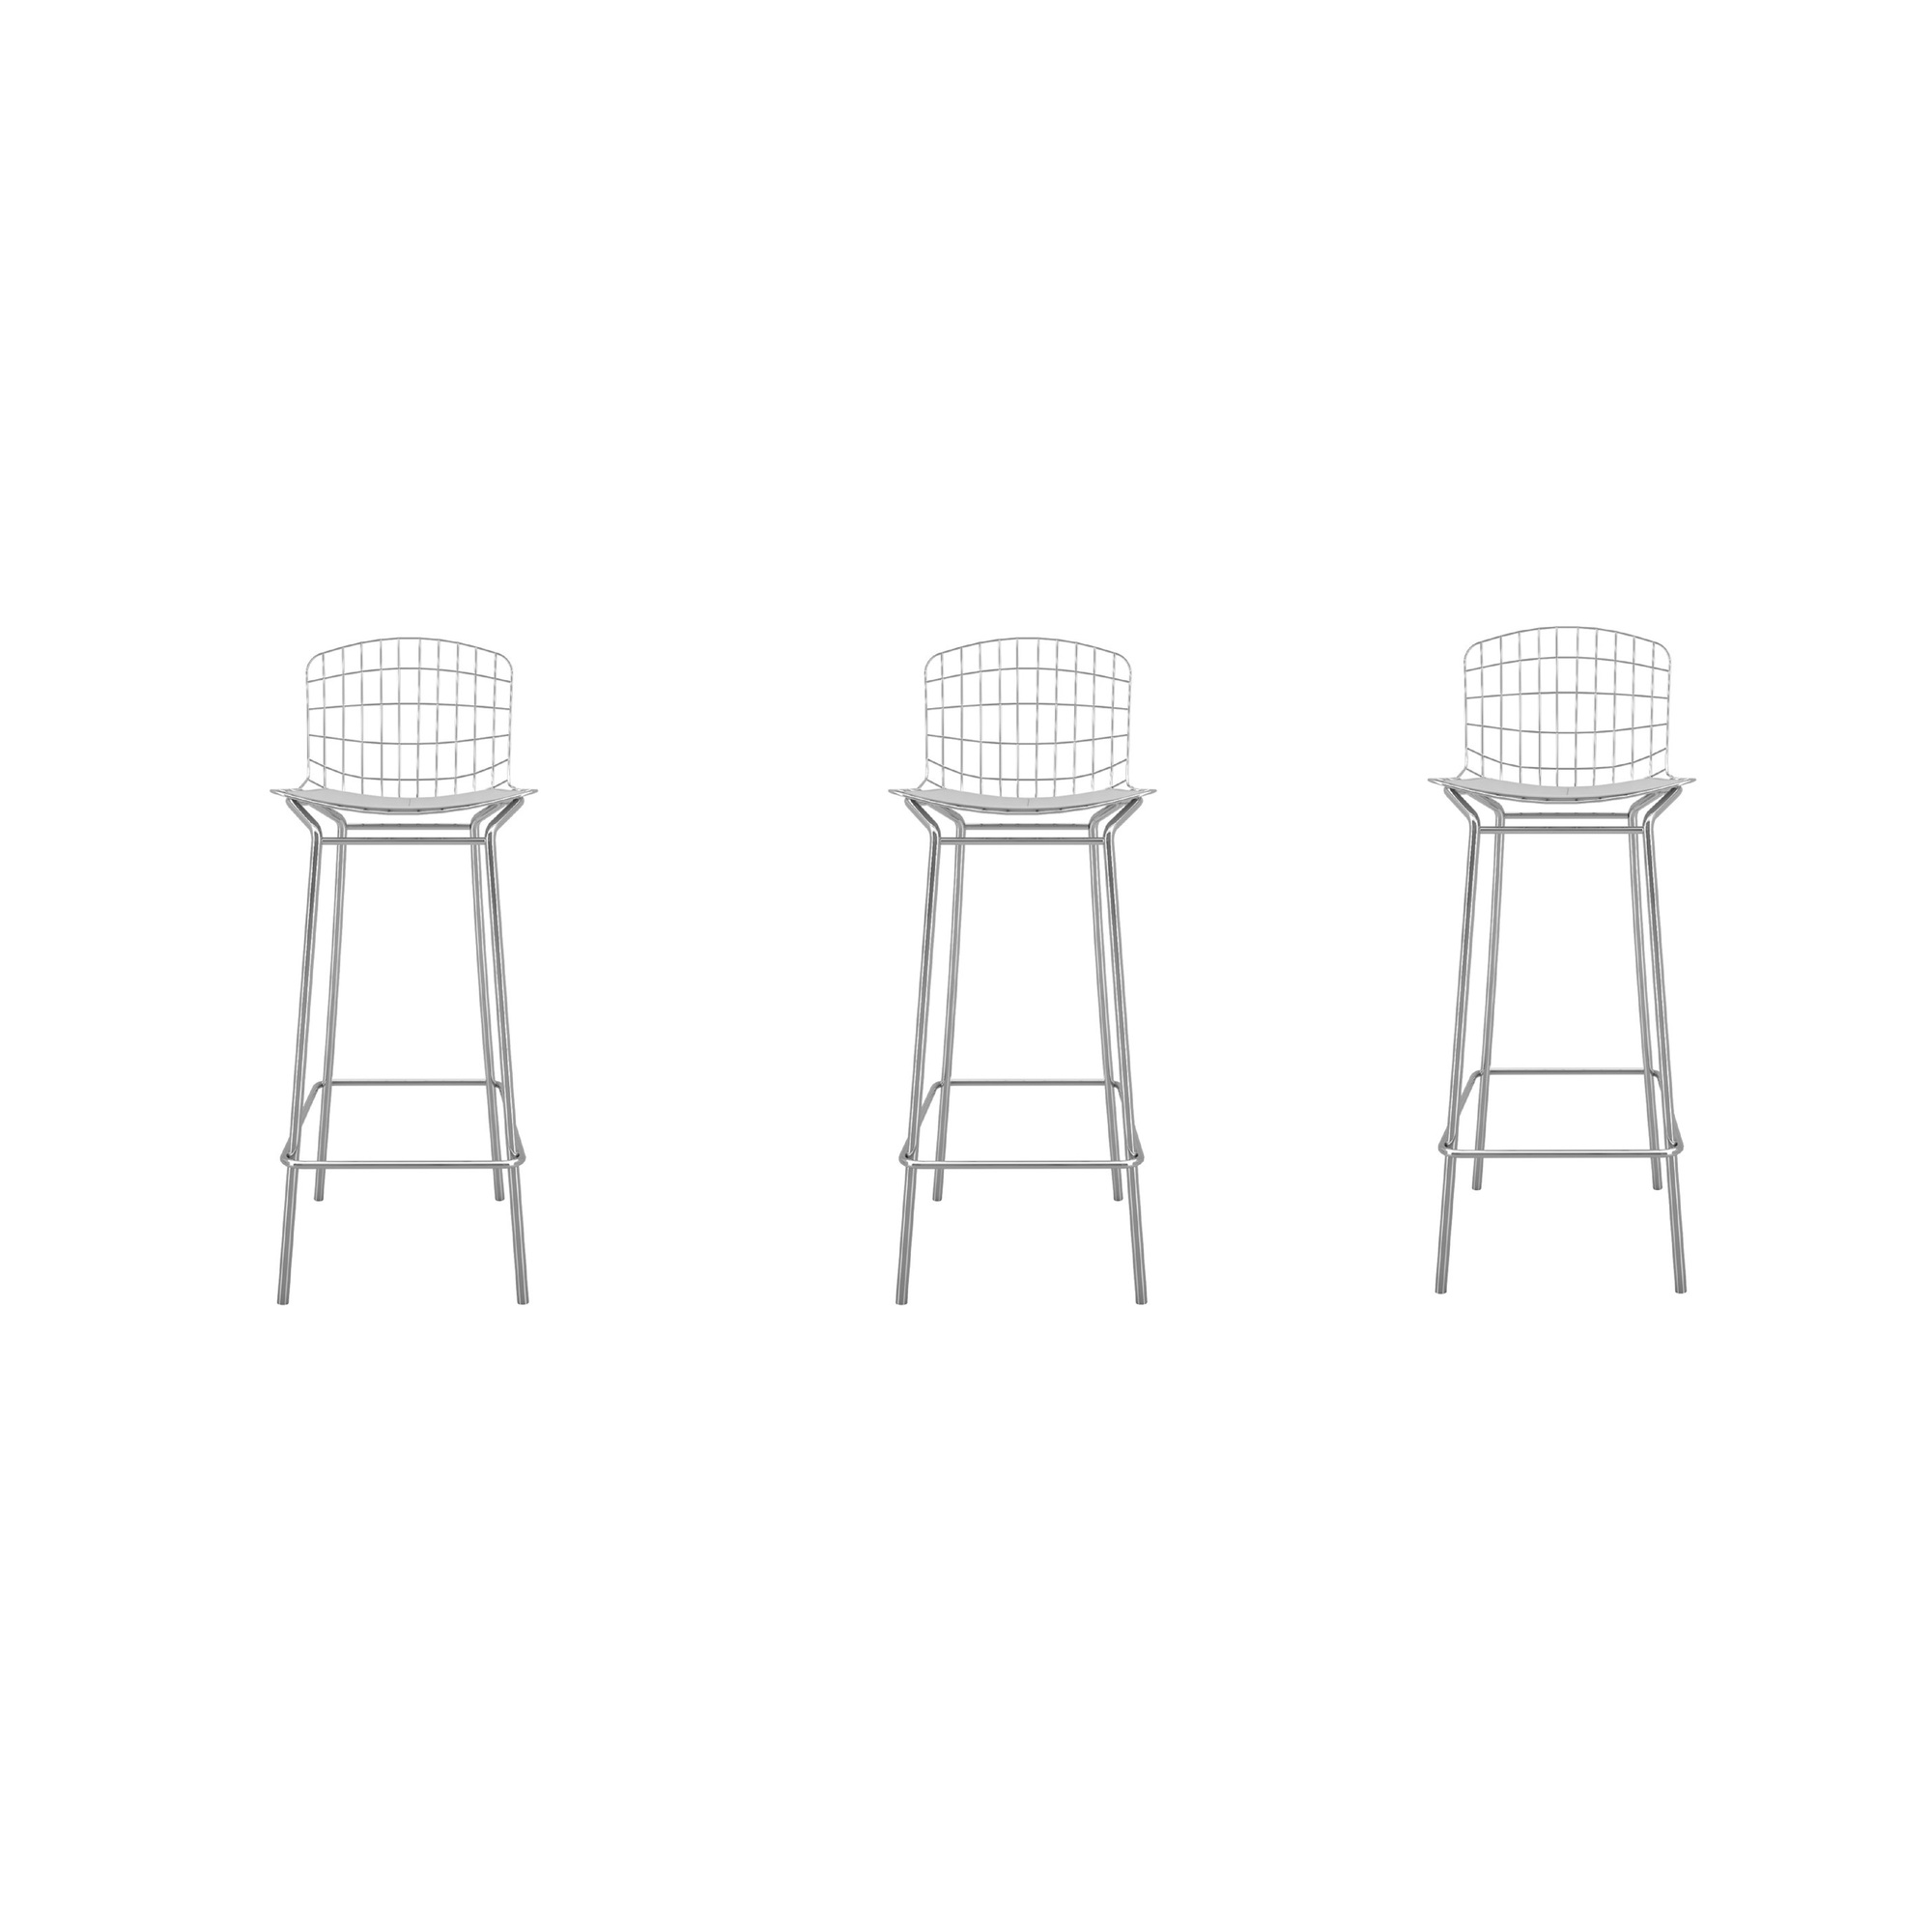 Manhattan Comfort, Madeline 41.73Inch Stool, Set of 3 Silver and White, Primary Color White, Included (qty.) 3 Model 3-198AMC